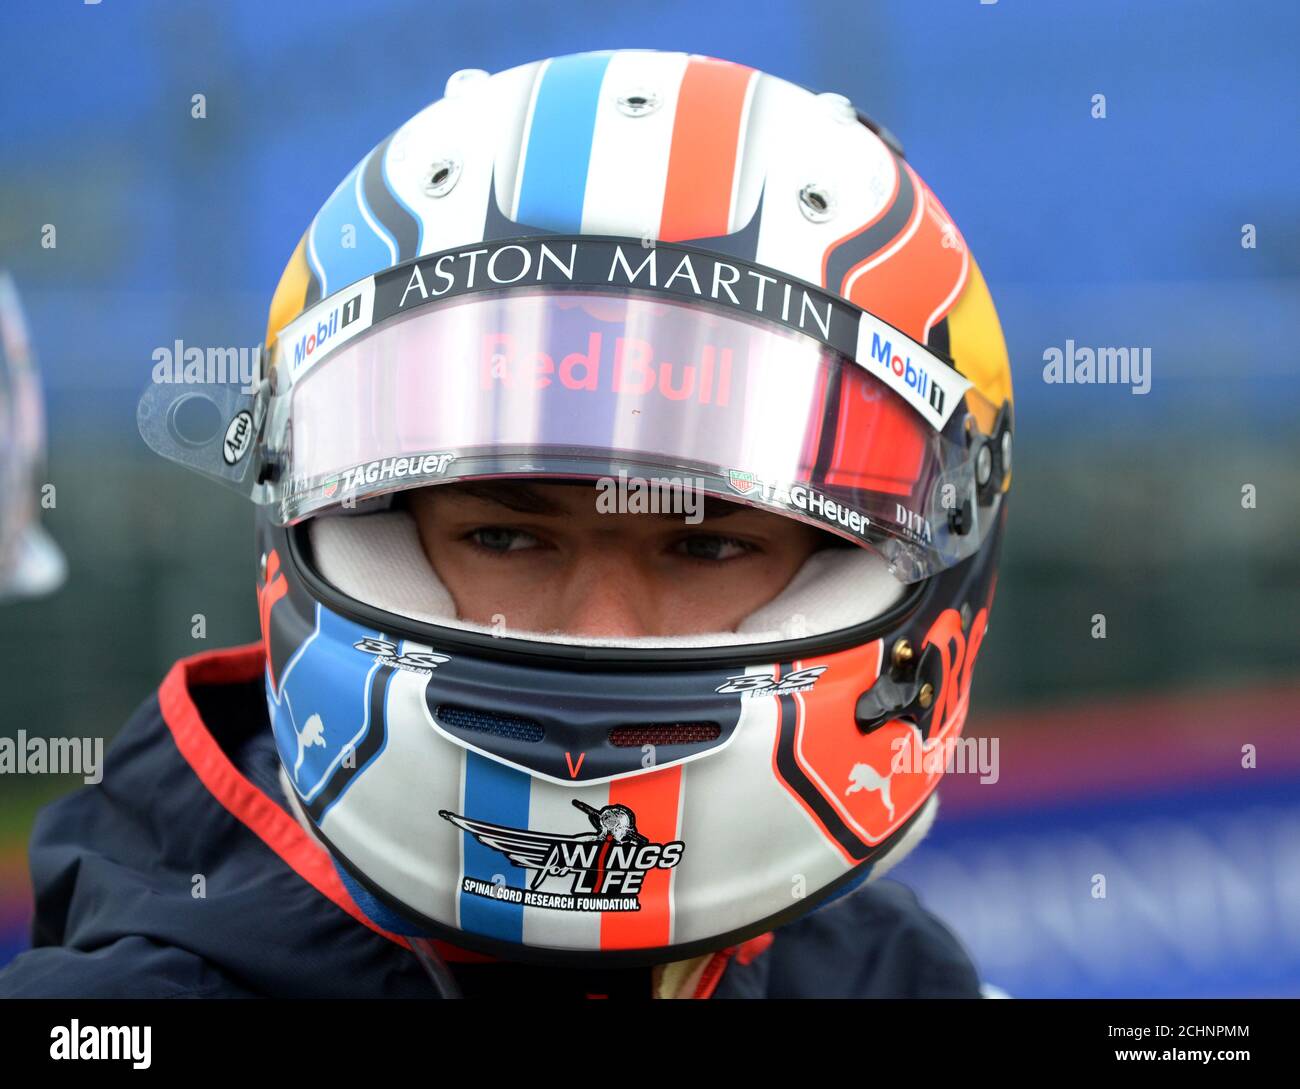 REFILE - CORRECTING CAPTION Formula One F1 - Belgian Grand Prix - Spa-Francorchamps, Stavelot, Belgium - August 29, 2019  Toro Rosso's Pierre Gasly ahead of the Belgian Grand Prix  REUTERS/Johanna Geron Stock Photo